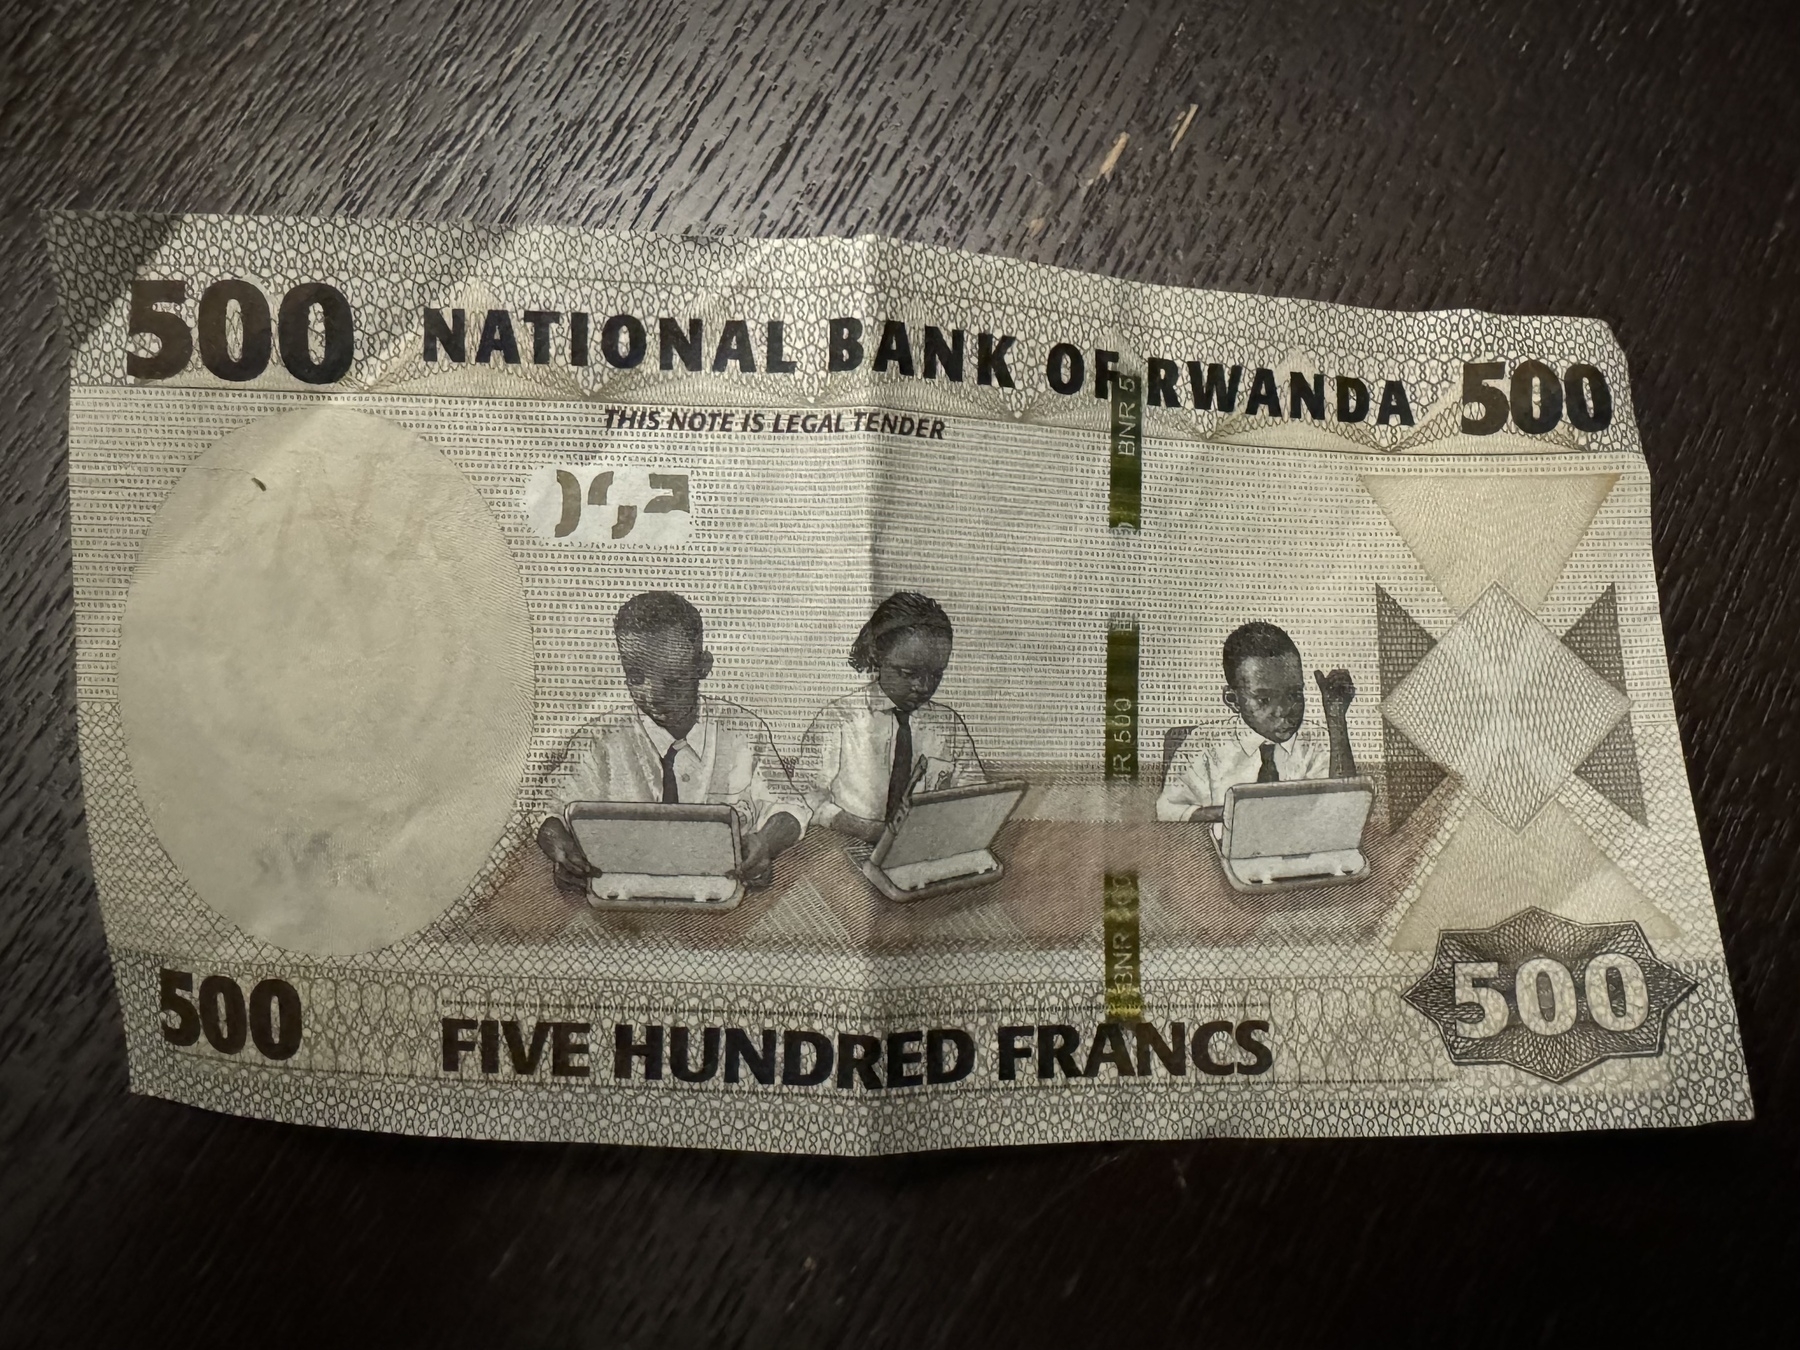 A bank note shows three children typing on small laptops. 